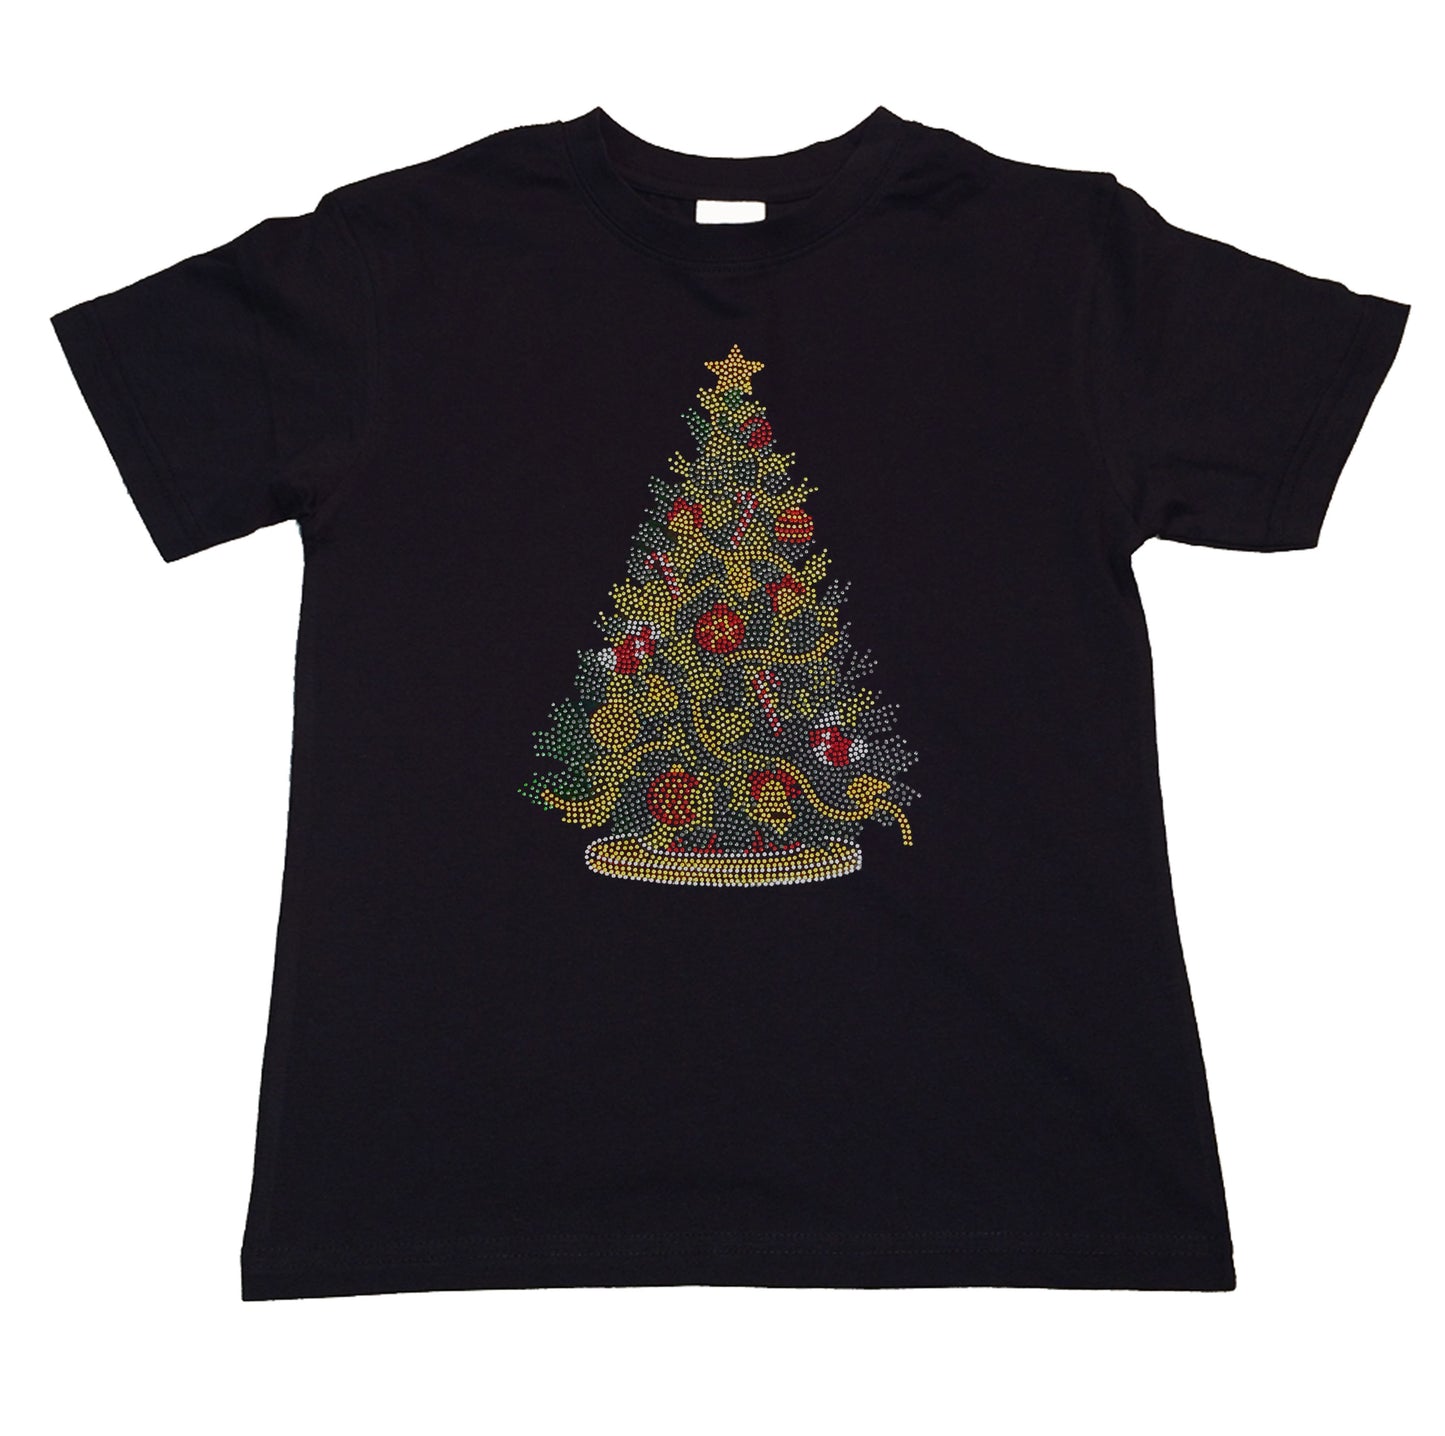 Girls Rhinestone T-Shirt " Colorful Christmas Tree in Rhinestuds " Kids Size 3 to 14 Available